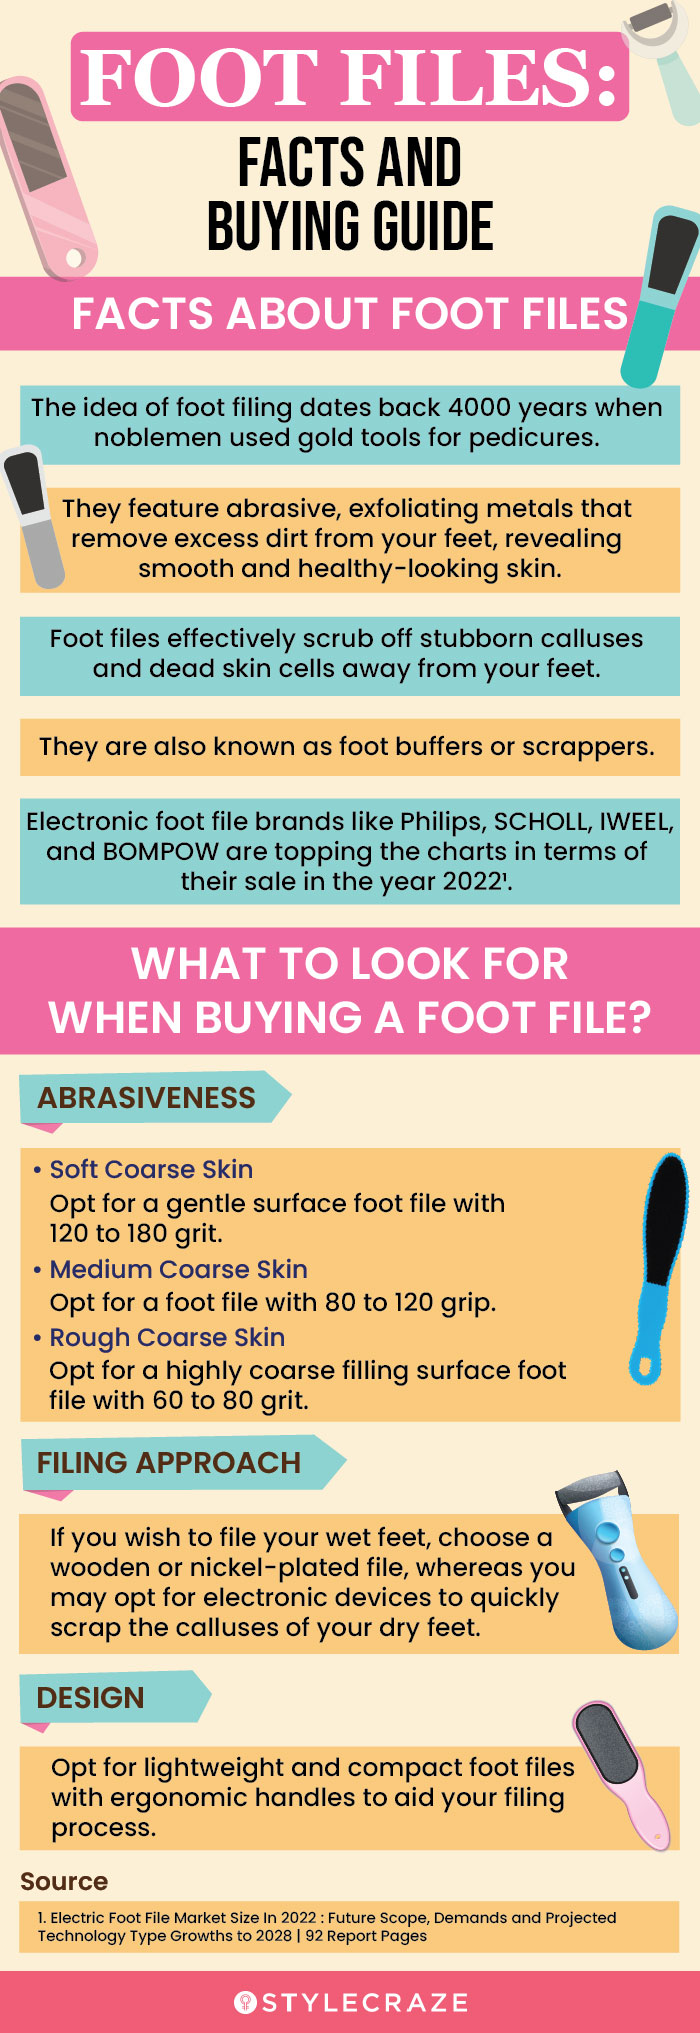 Foot Files: Facts And Buying Guide [infographic]